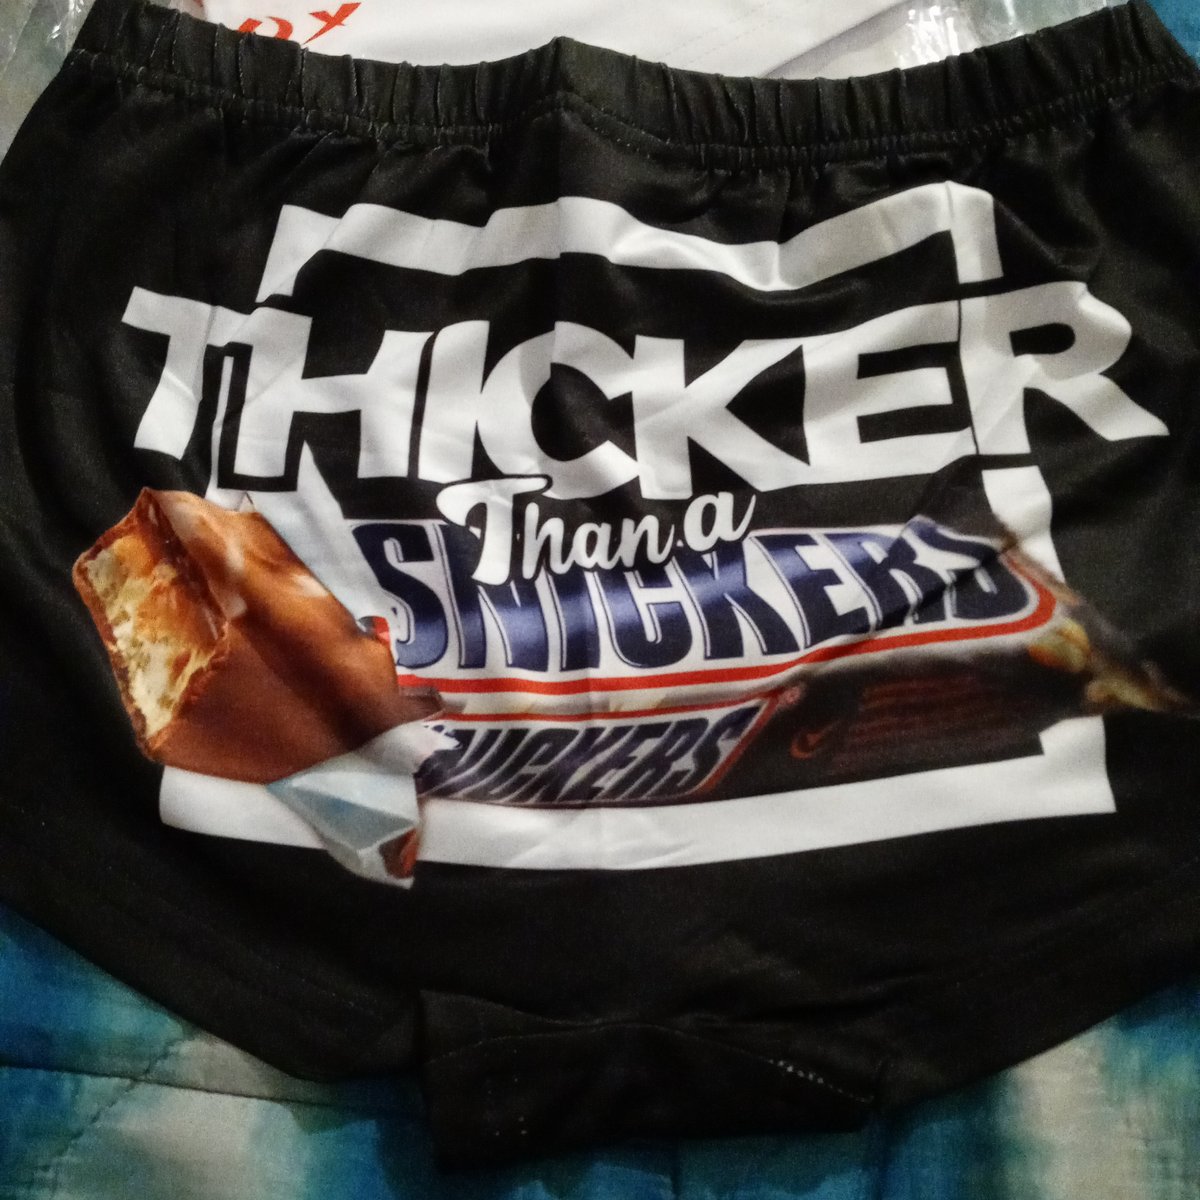 Snickers thicker than a 